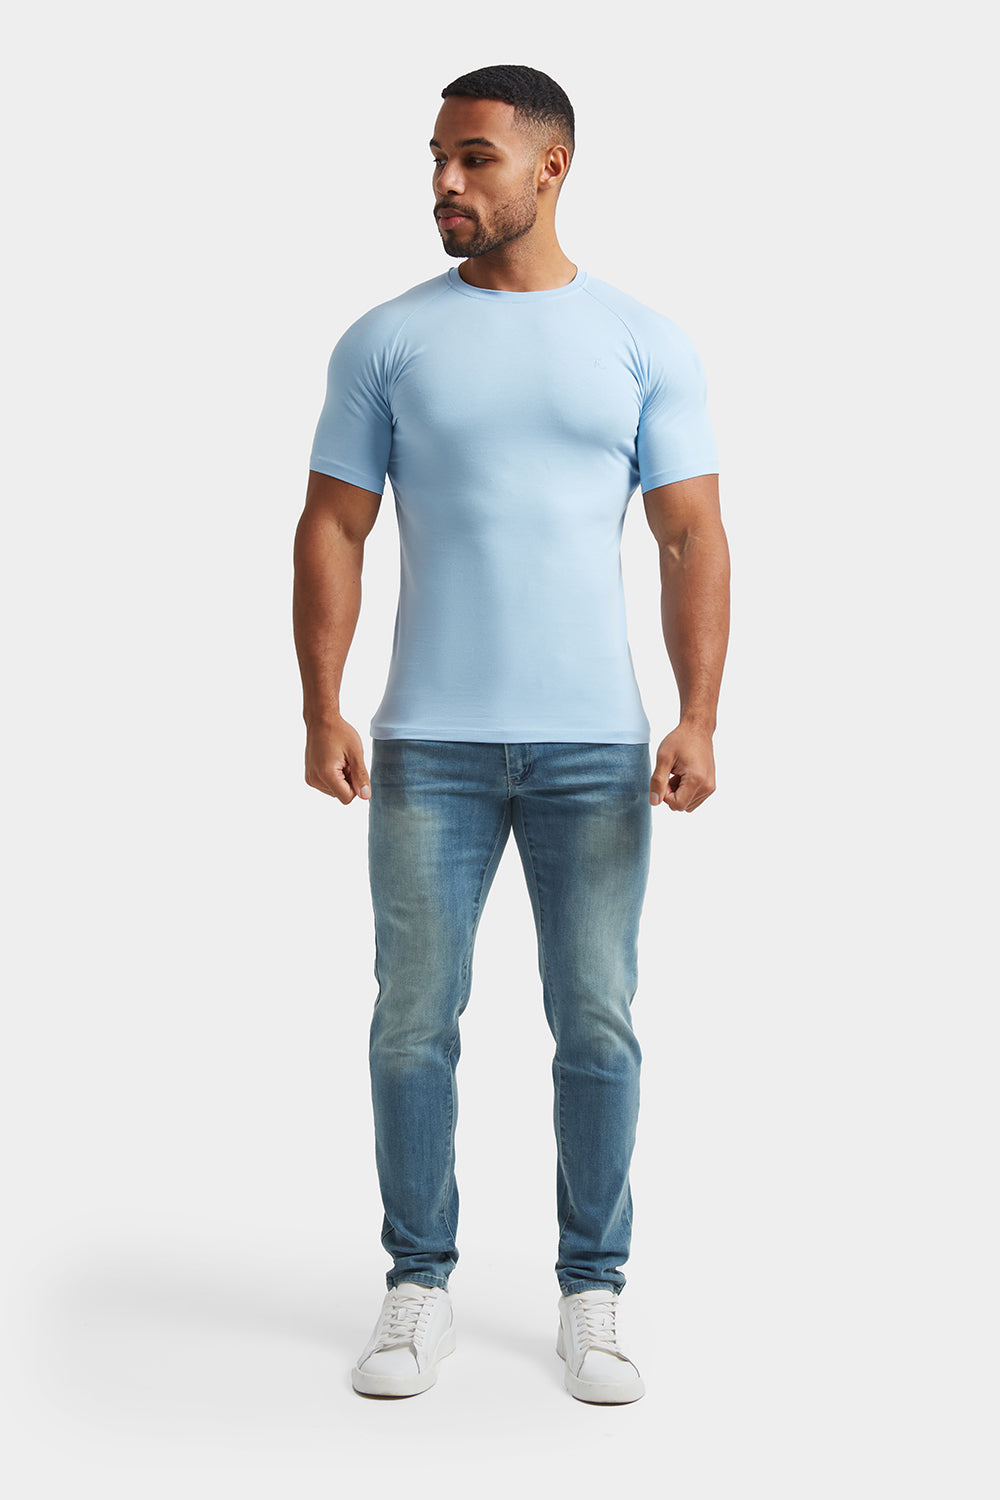 Muscle Fit Jeans in Light Blue - TAILORED ATHLETE - ROW